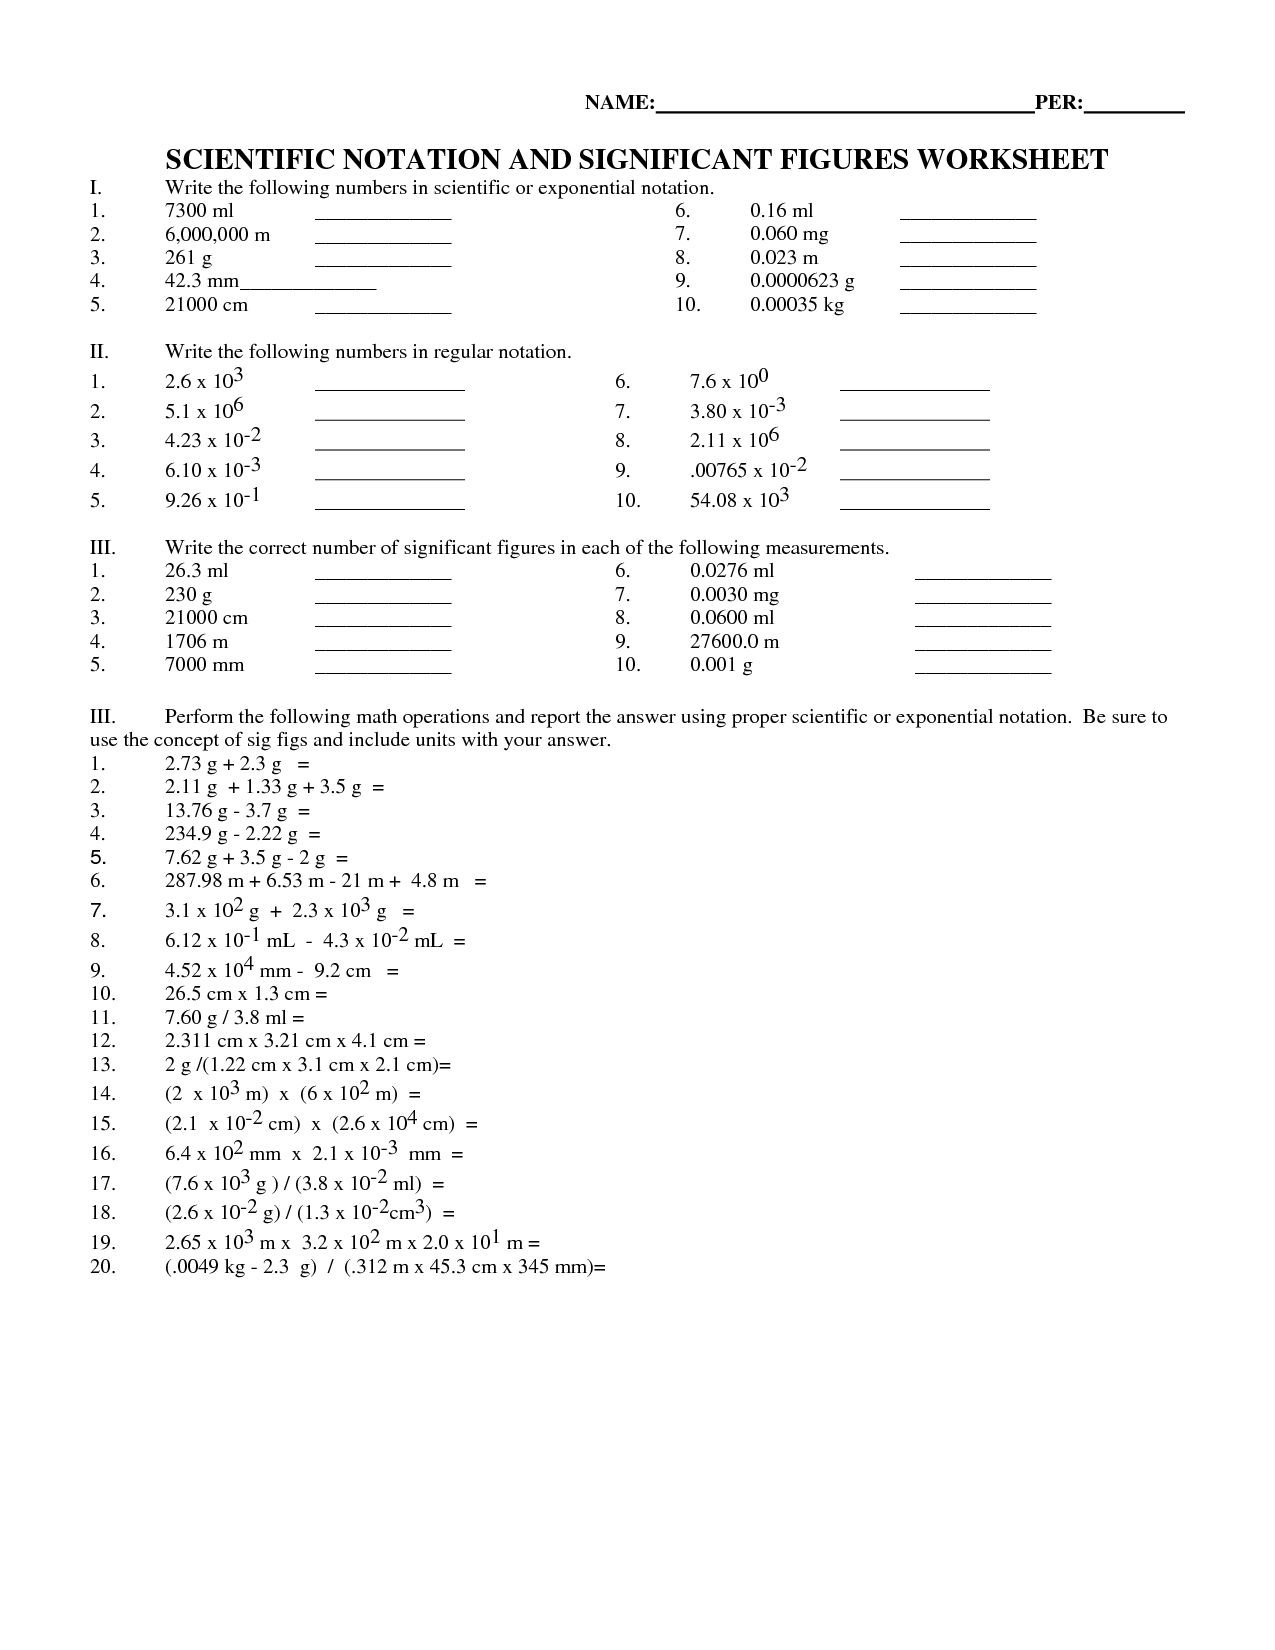 Chemistry Worksheet Significant Figures And Scientific Notation  Kidz Activities